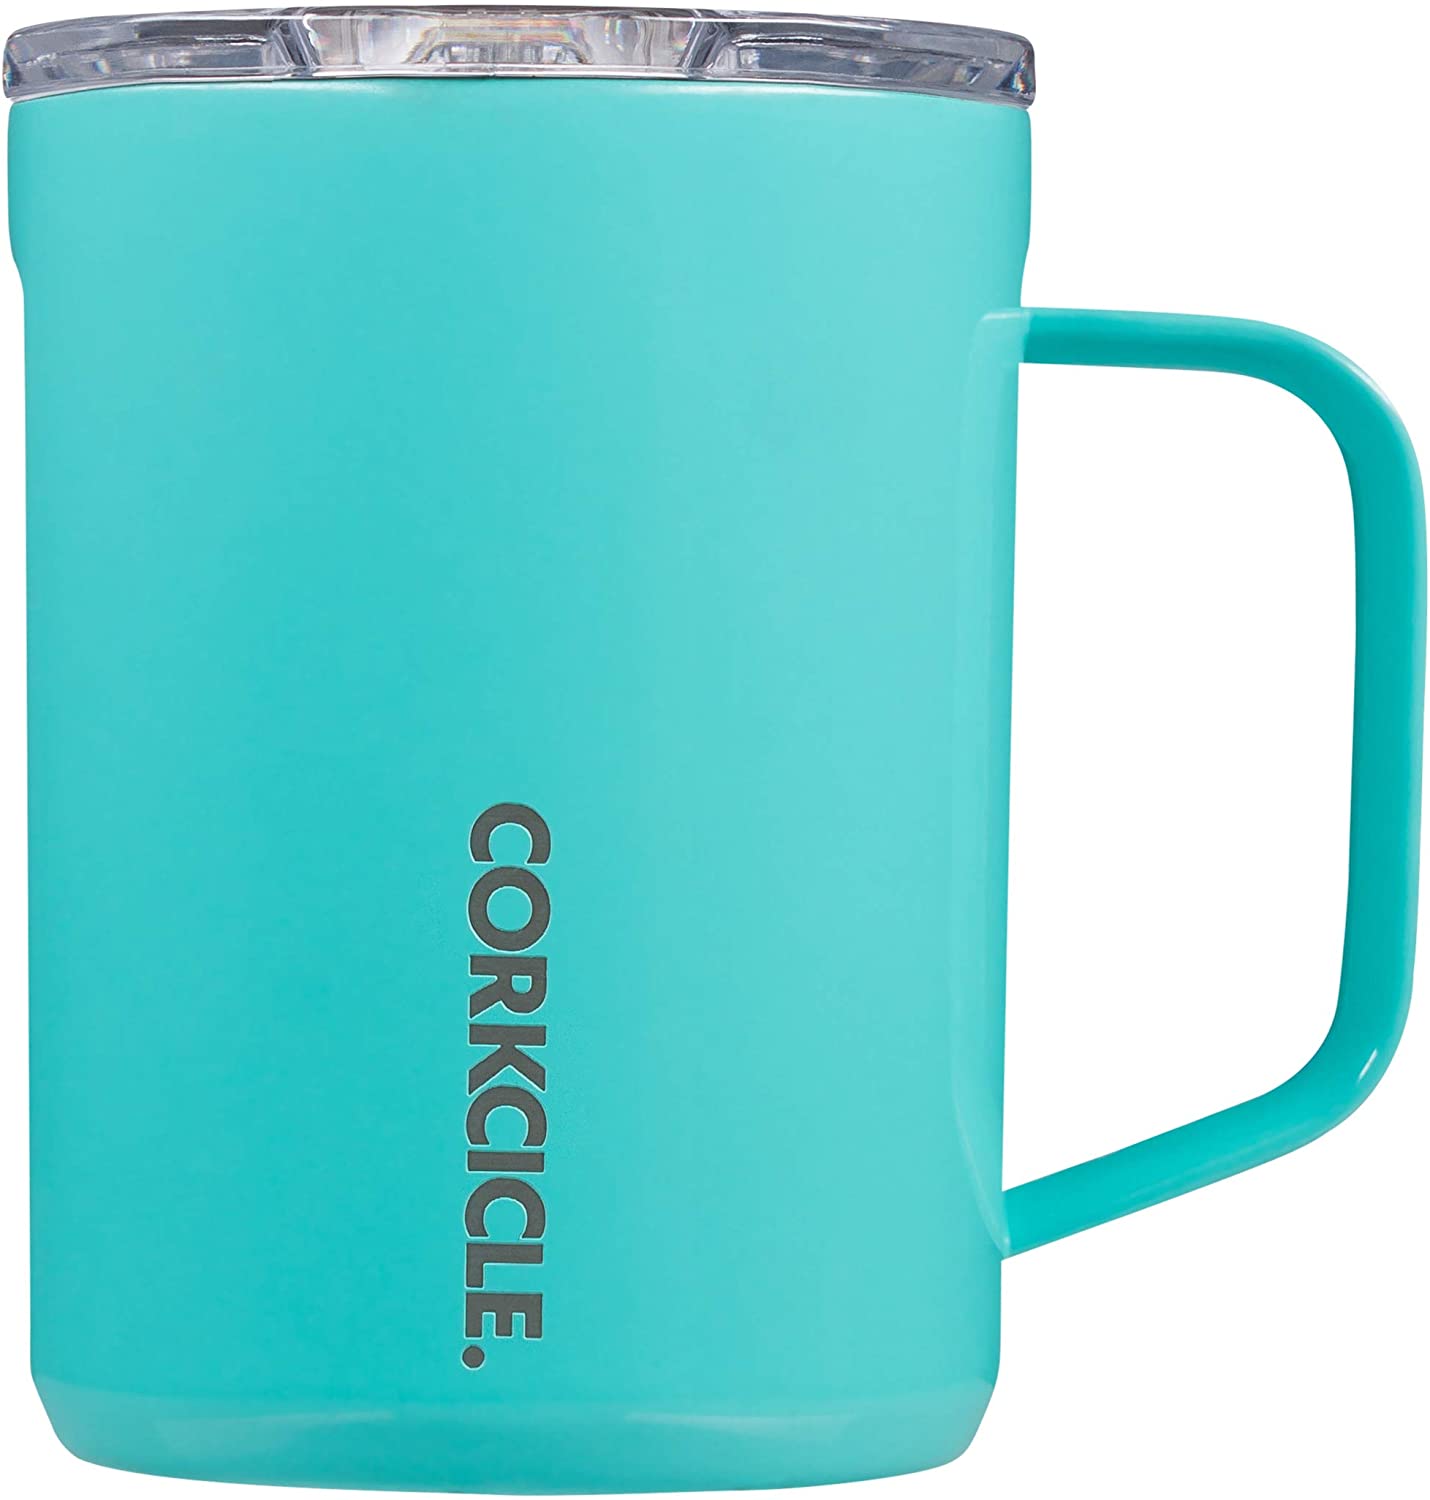 Corkcicle 16oz Coffee Mug - Triple-Insulated Stainless Steel Cup with Handle (Gloss Turquoise)